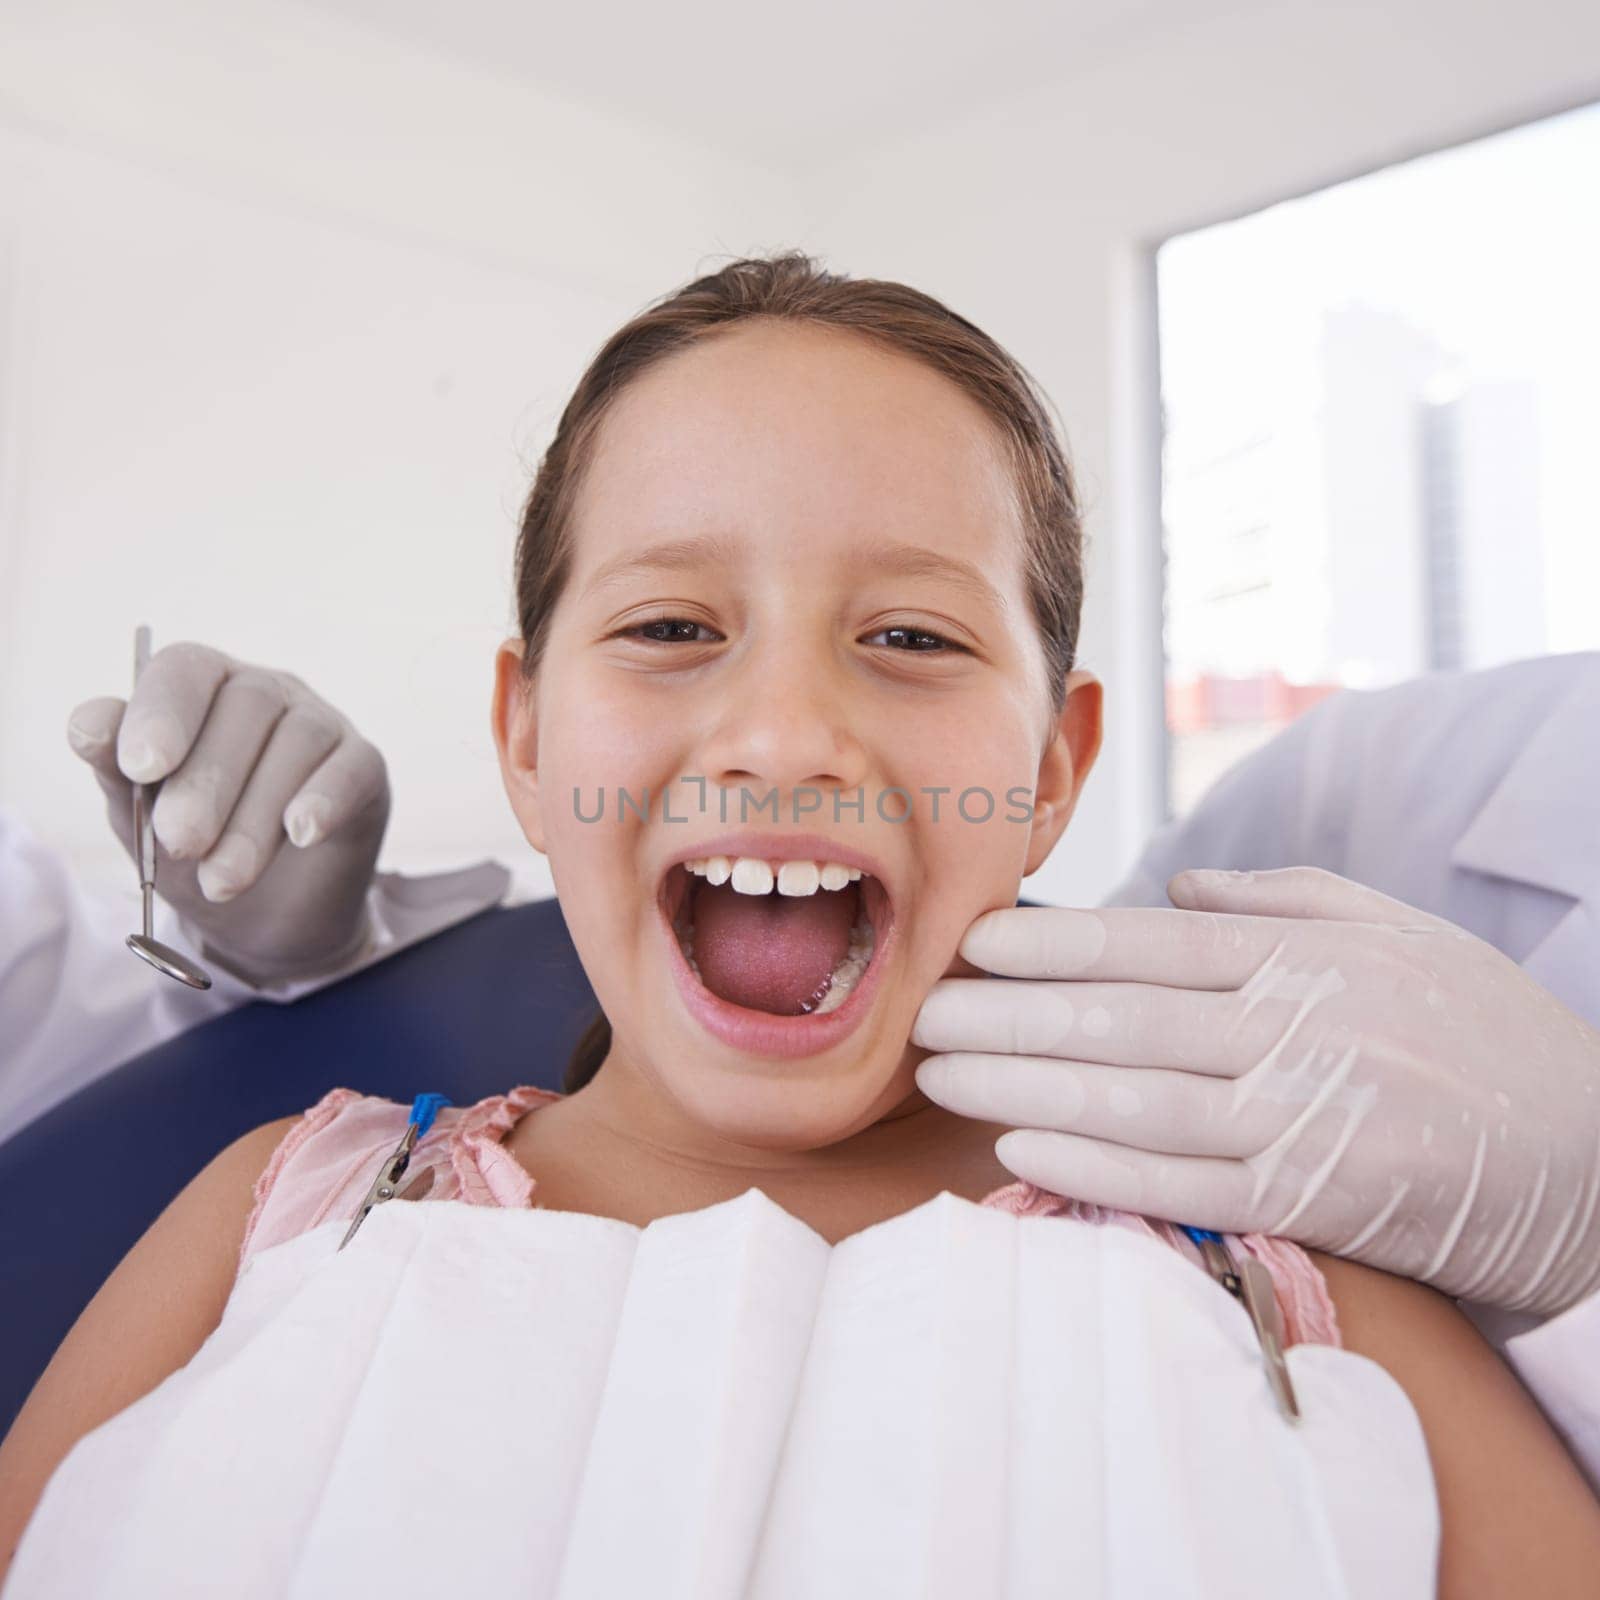 Child, mouth and portrait for dentist consultation for teeth examination for healthy oral care, whitening or cleaning. Female person, girl and face with hands for hygiene checkup, wellness or gums.